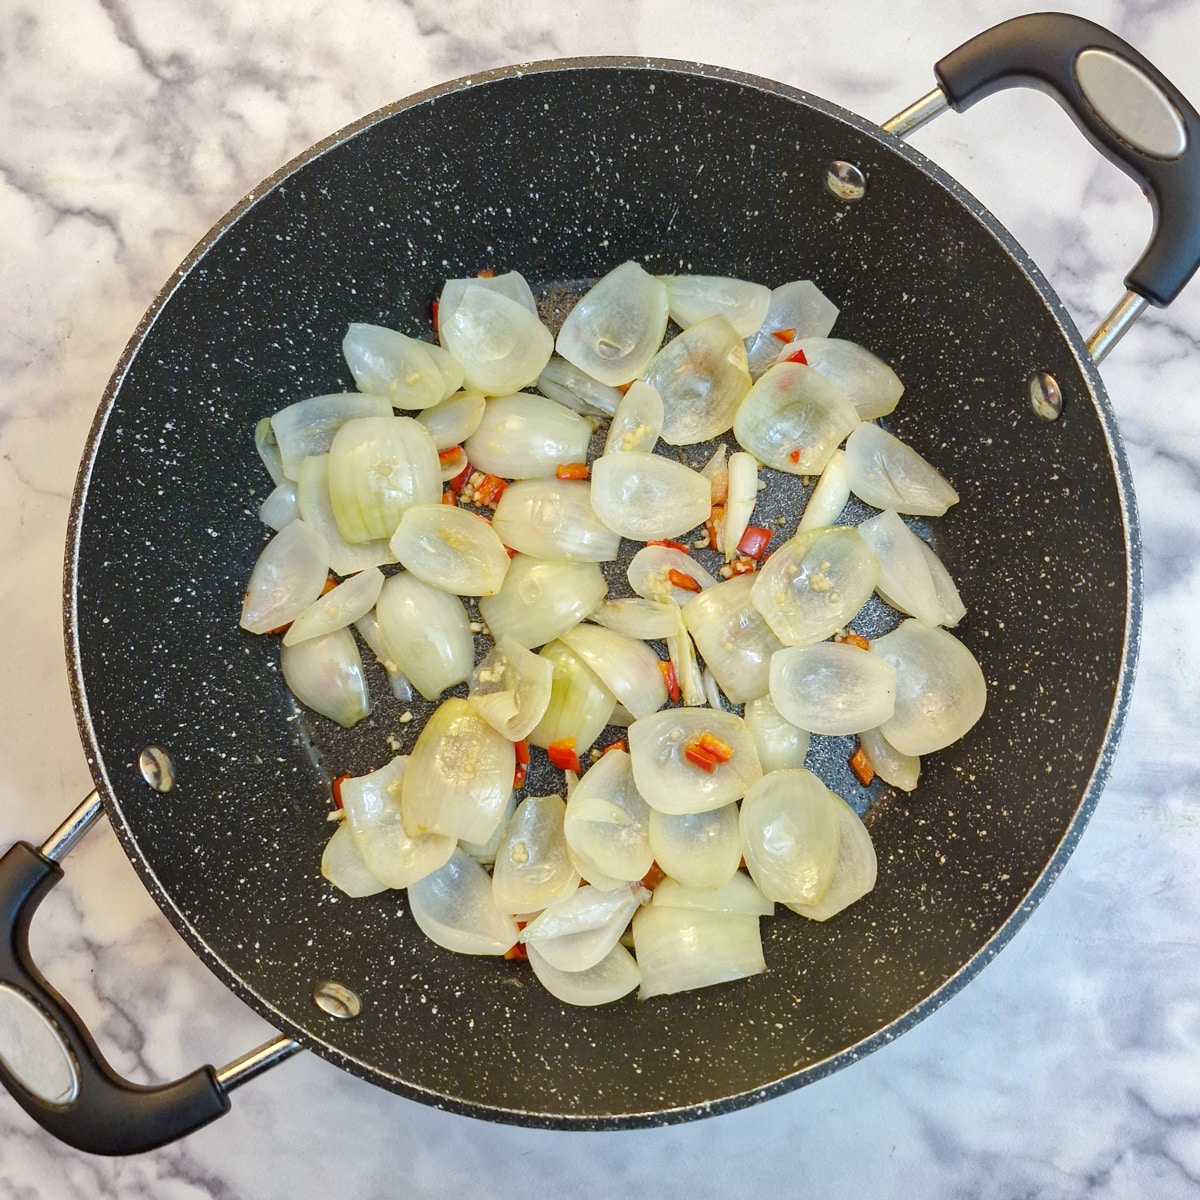 Translucent onions and chilli in a frying pan with garlic.